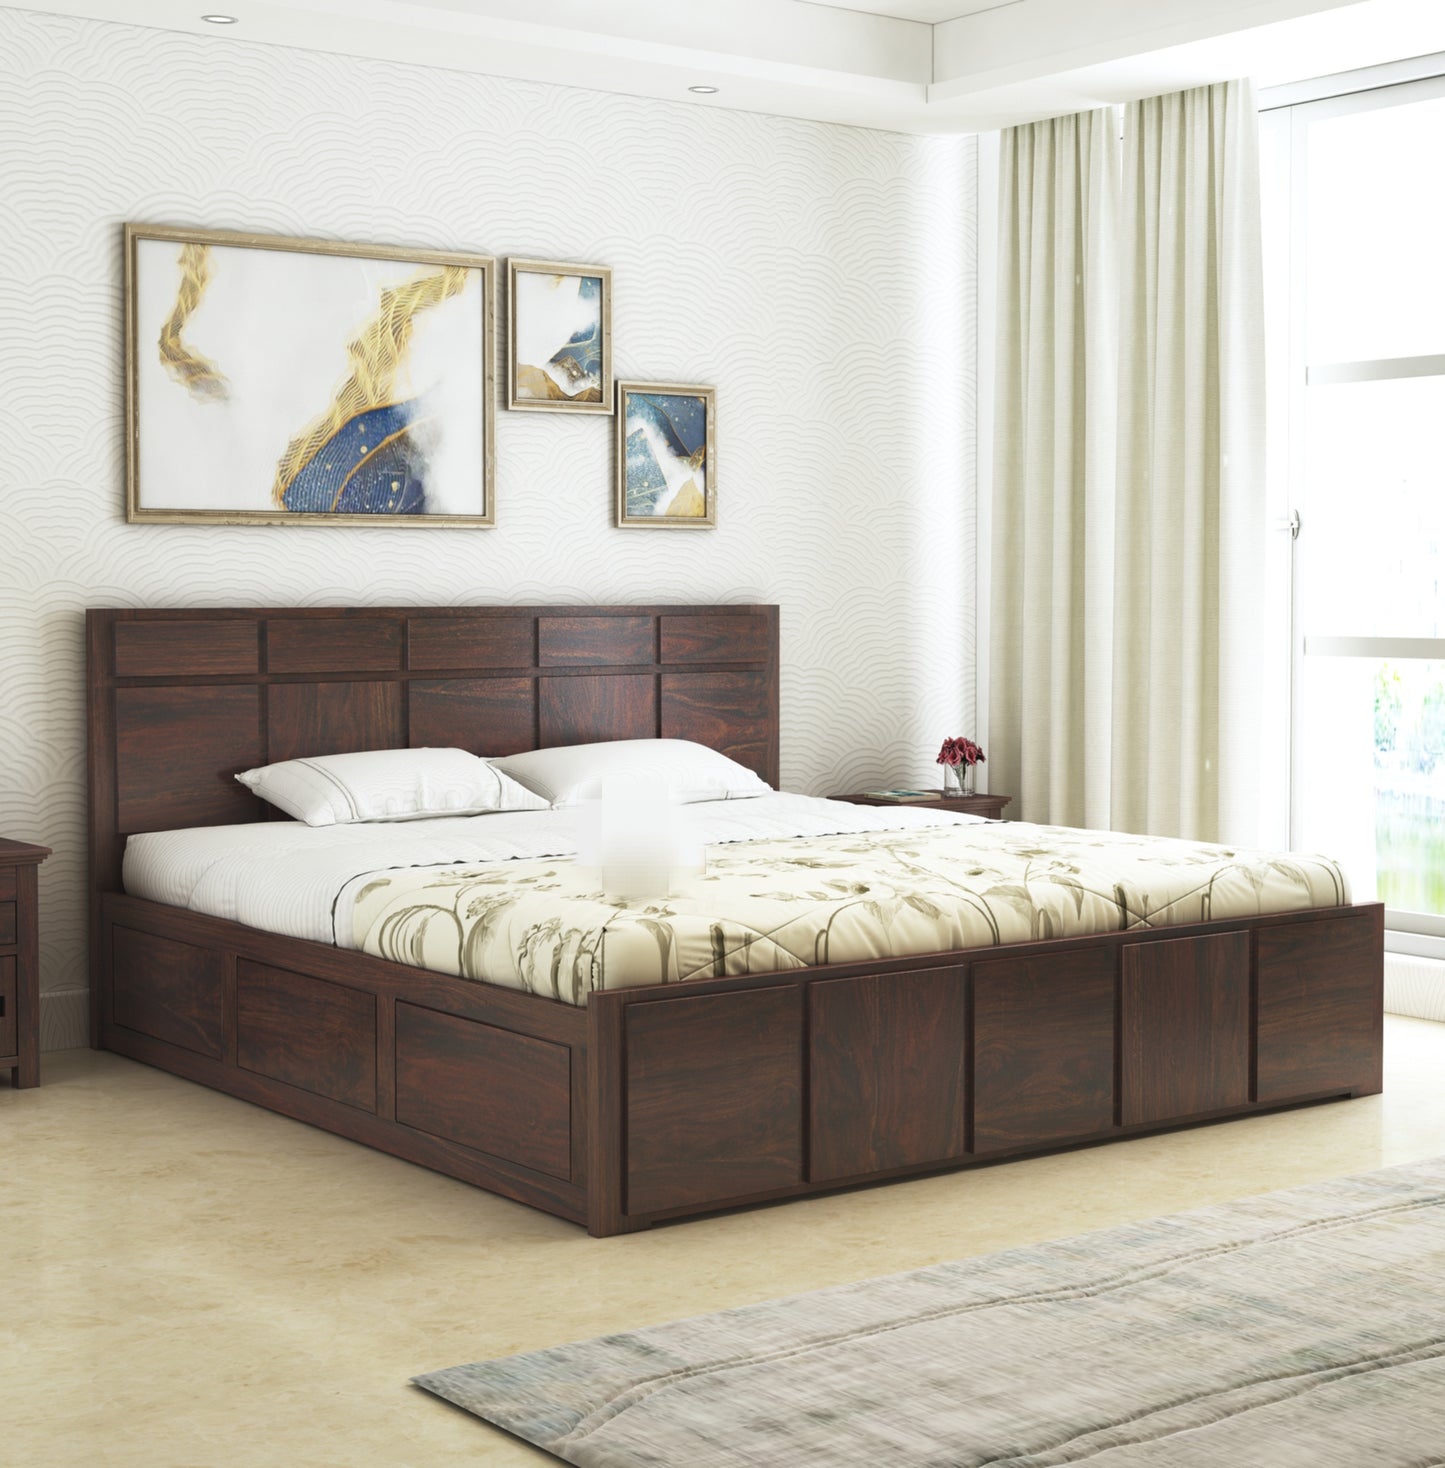 Sheesham Square Design Wooden Double Bed With Box Storage